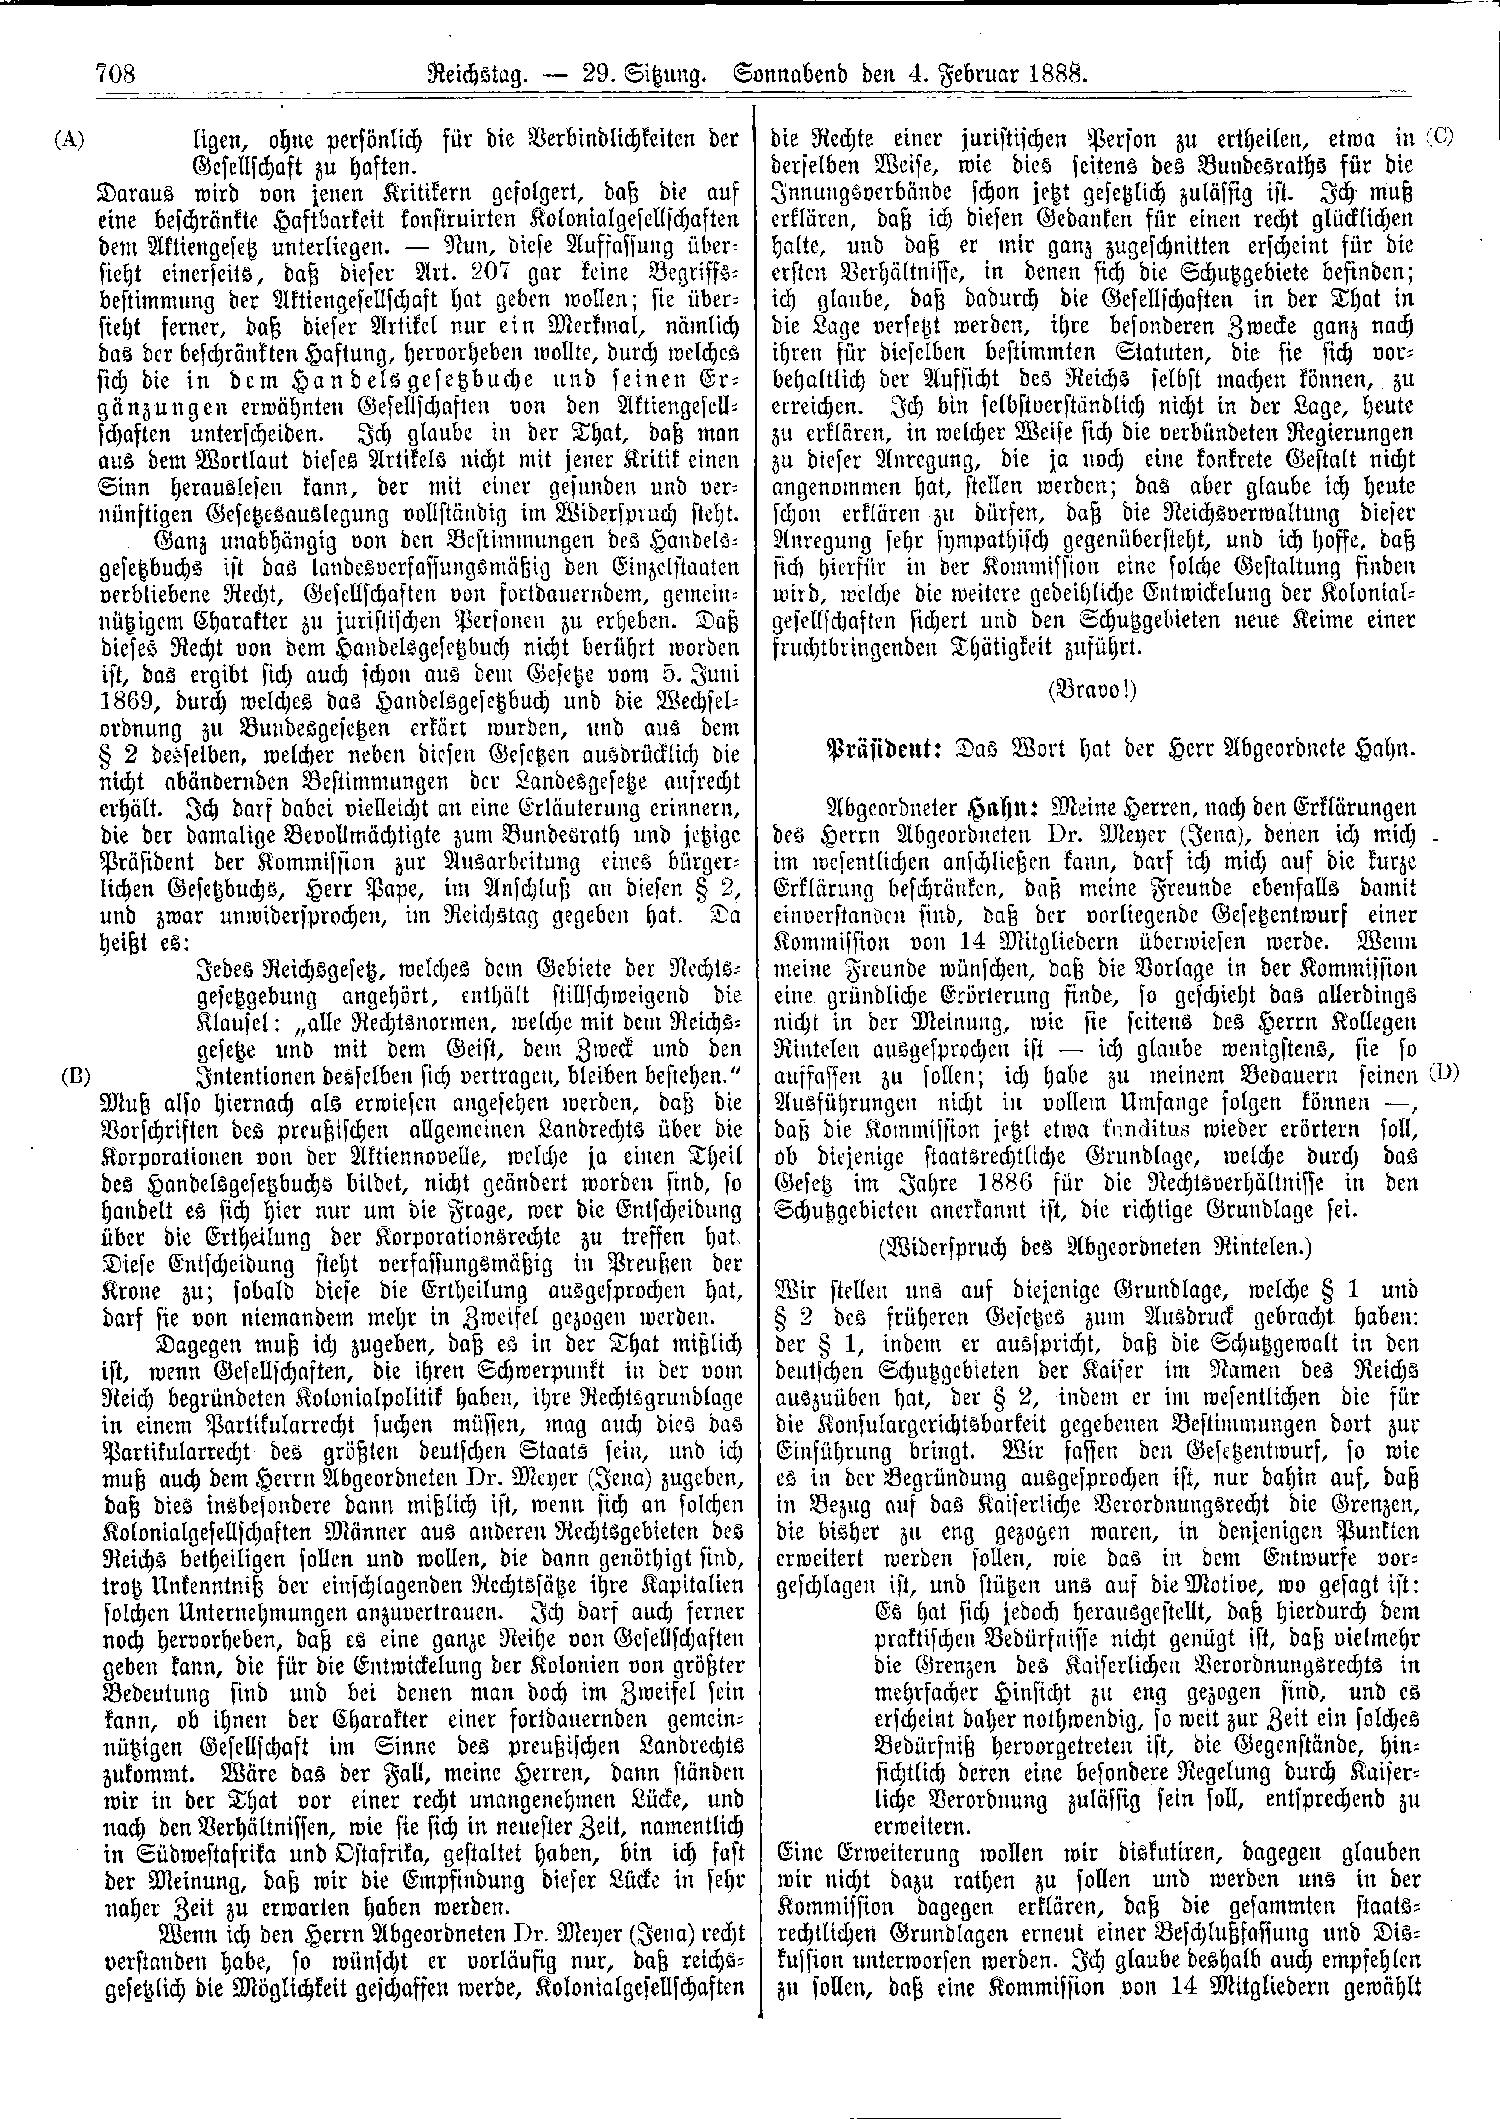 Scan of page 708